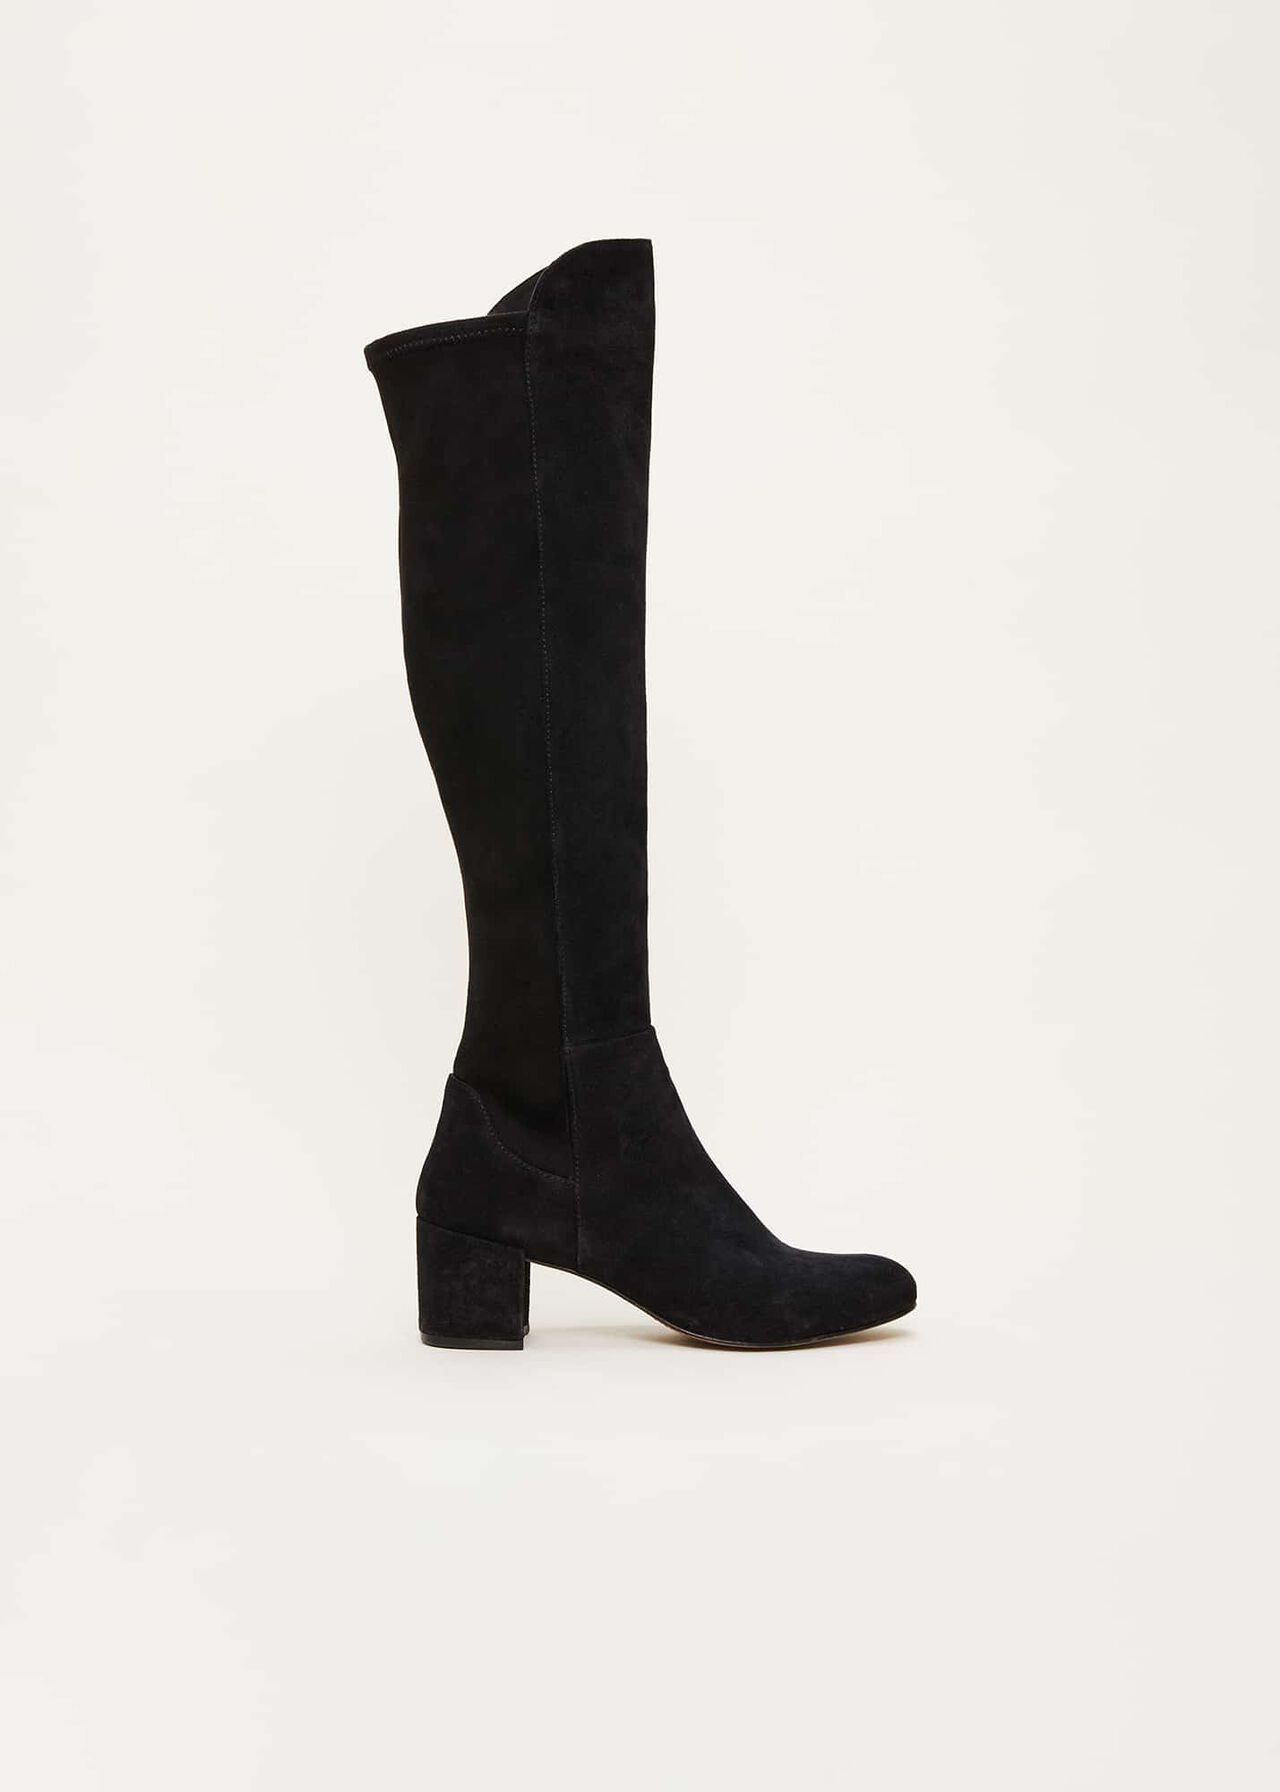 Milly Knee High Boot